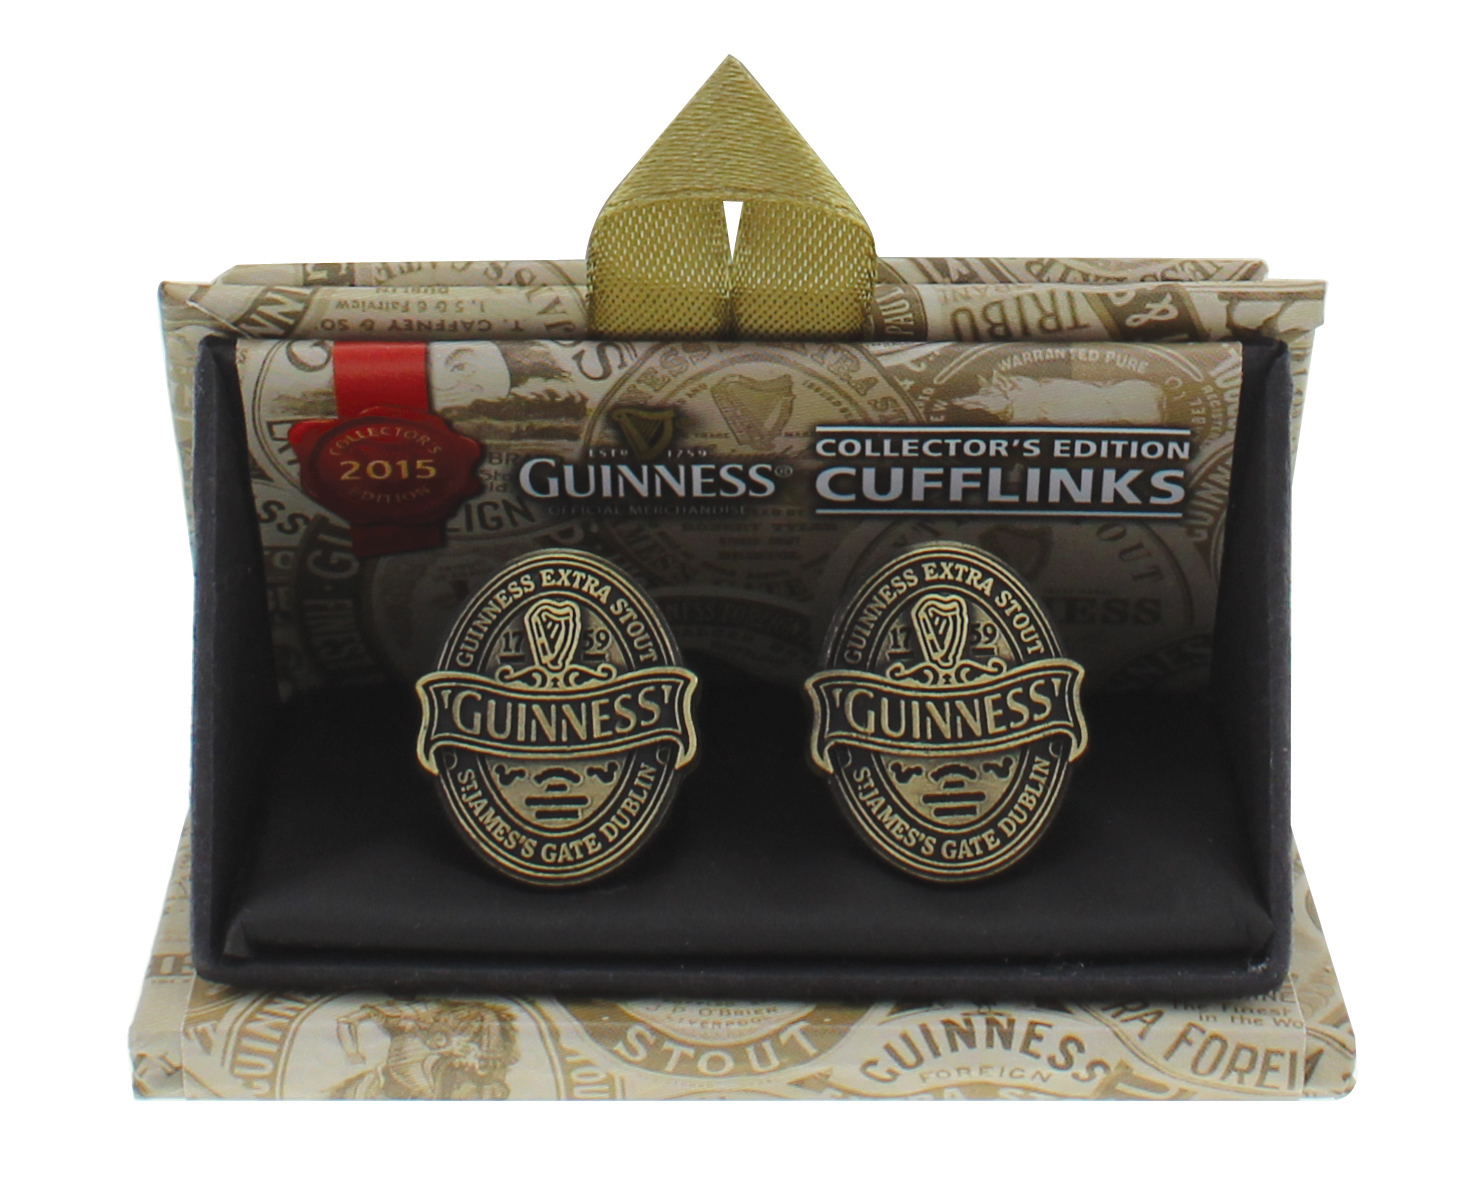 Guinness 2015 Collectors Cuff Links